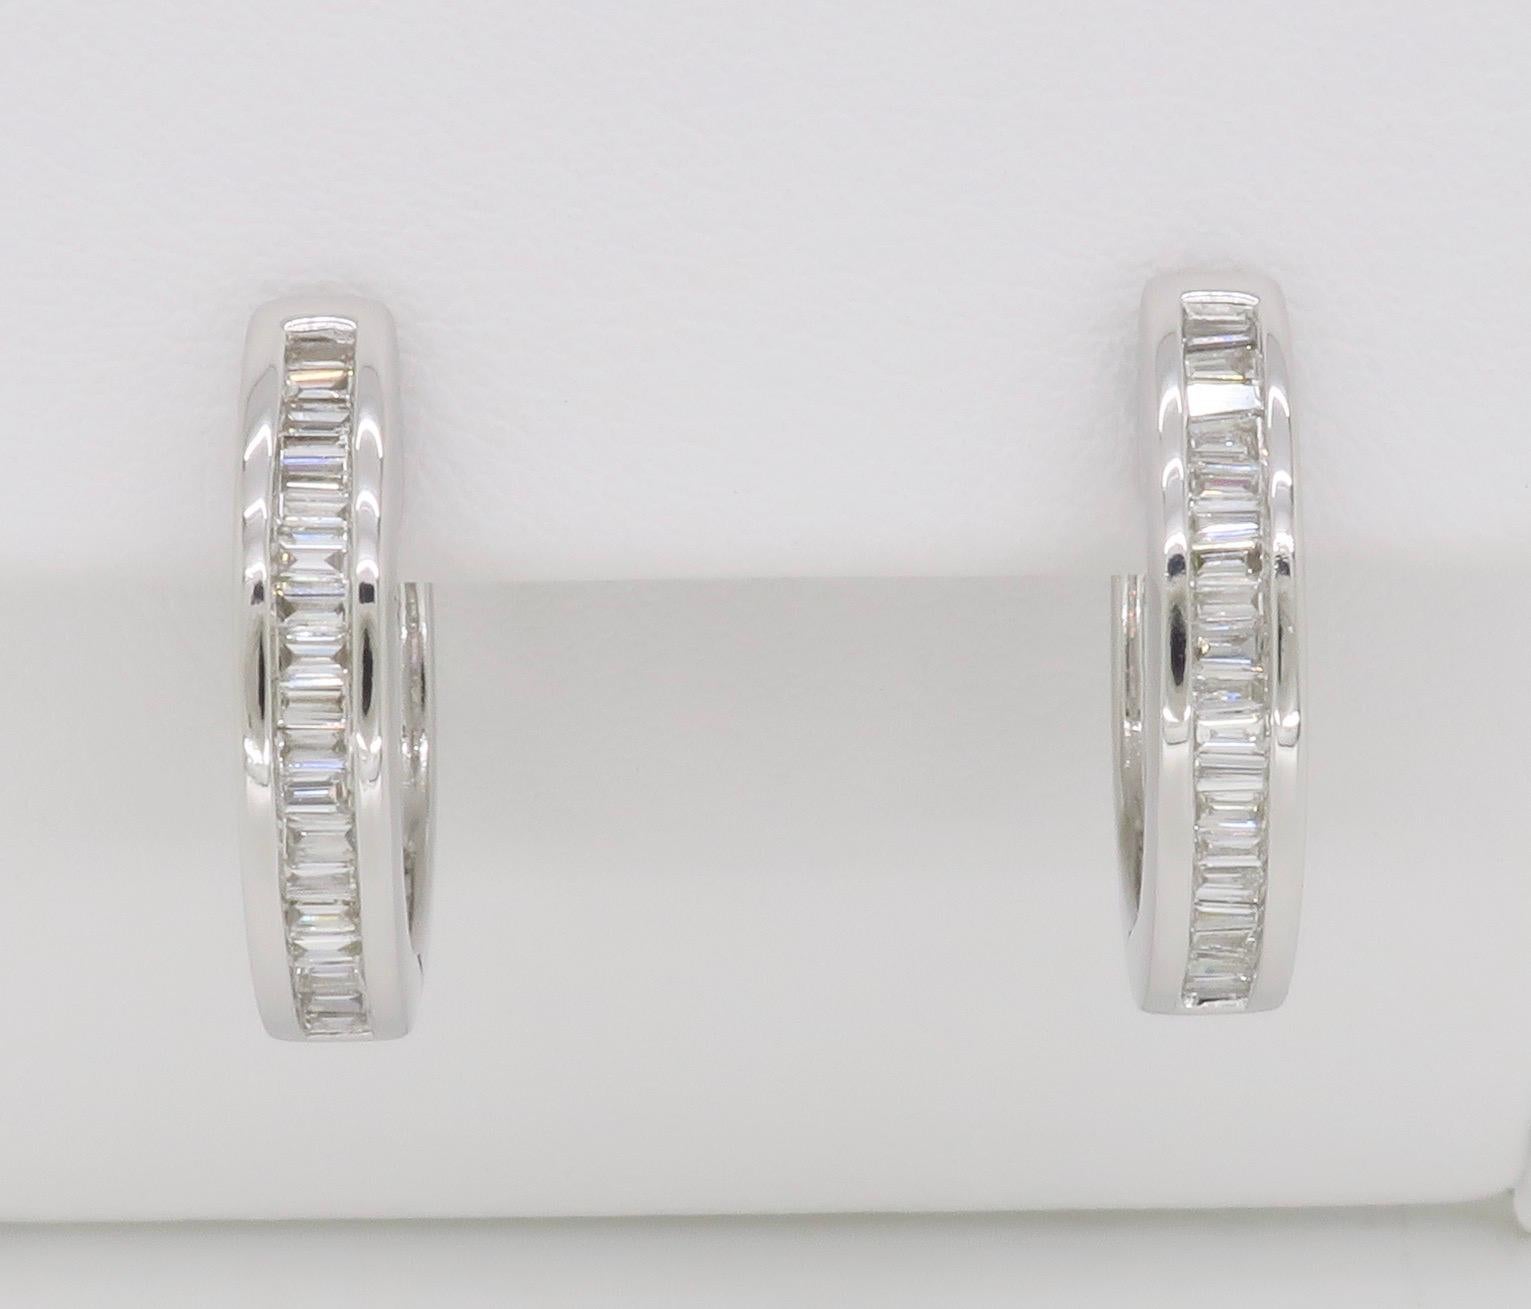 Channel set baguette cut diamond hoop earrings made in 18k white gold. 

Diamond Carat Weight: .75CTW
Diamond Cut: Baguette Cut Diamonds
Color: Average G-H
Clarity: Average VS
Metal: 18K White Gold
Marked/Tested: Stamped “18k 750